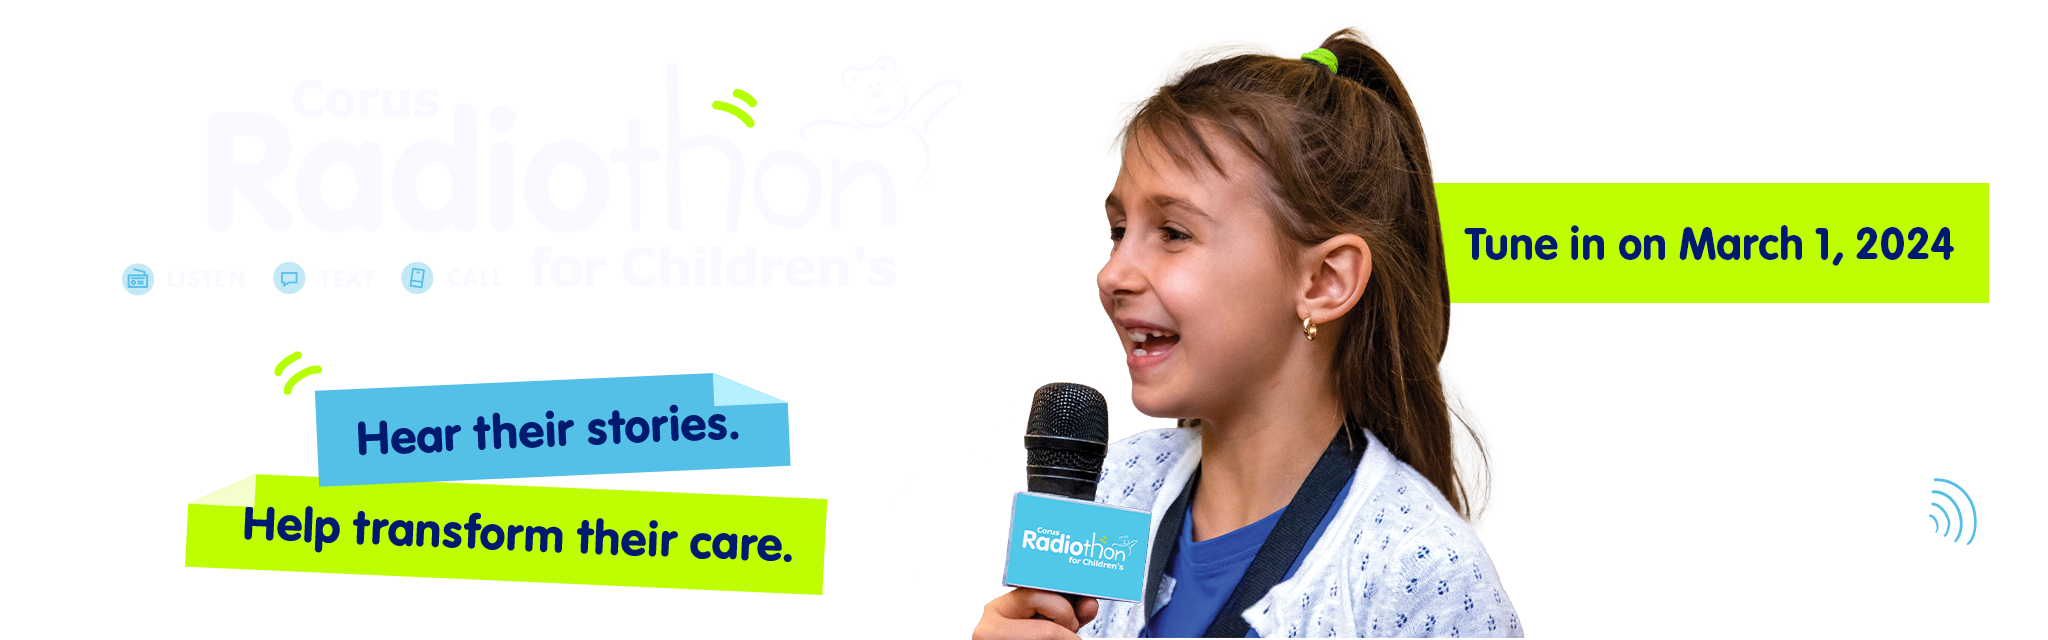 Tune in on March 1, 2024, Corus Radiothon for Children's, Listen, Text, Call, hear their stories. Help transform their care.